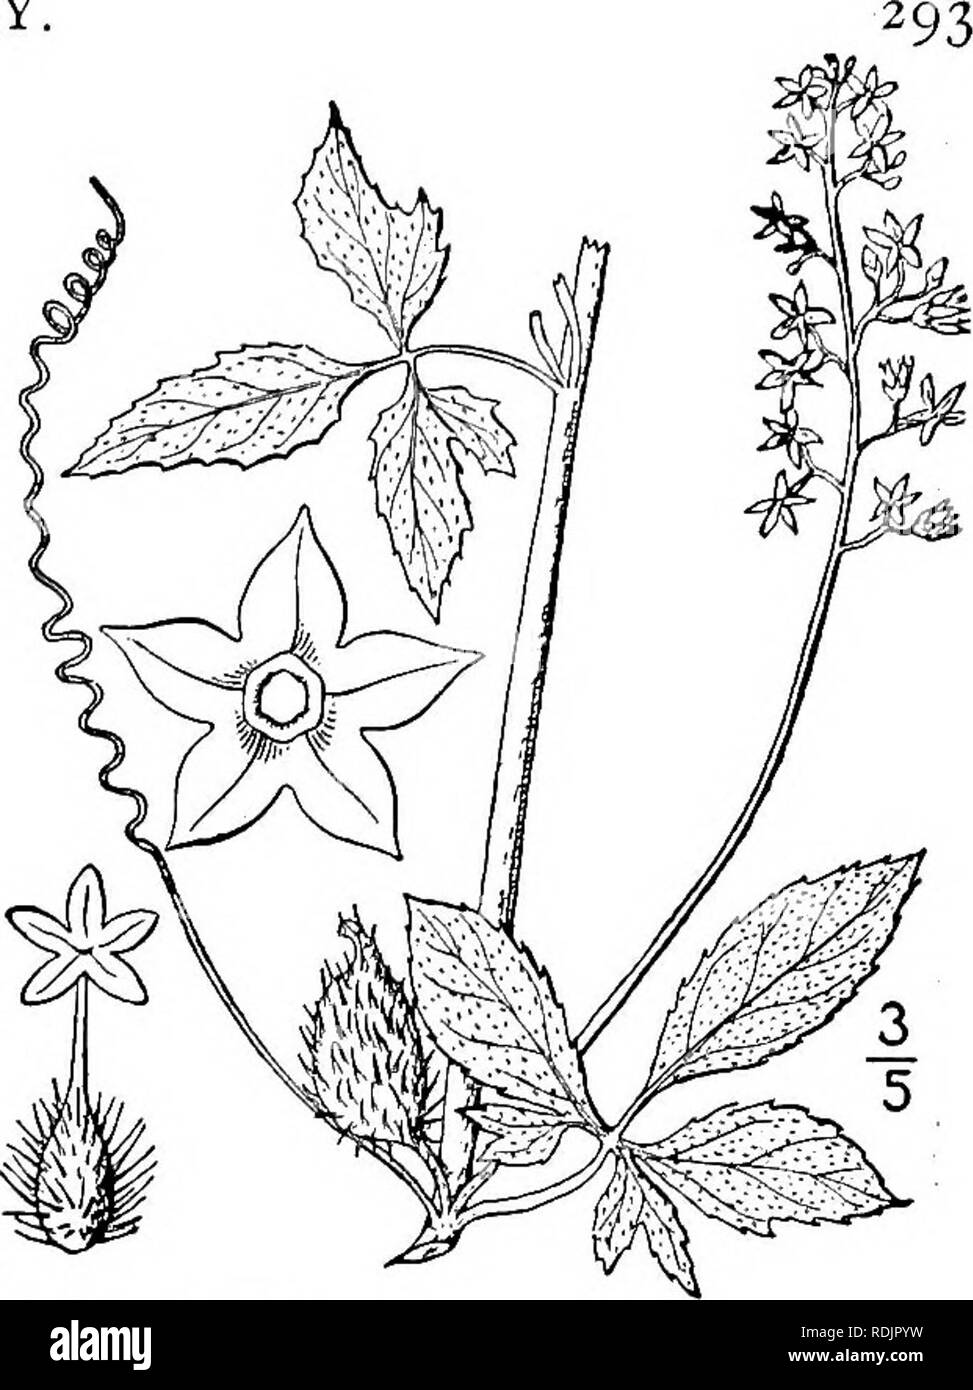 . An illustrated flora of the northern United States, Canada and the British possessions, from Newfoundland to the parallel of the southern boundary of Virginia, and from the Atlantic Ocean westward to the 102d meridian. Botany; Botany. Genus 4. GOURD FAMILY.. 1. Cyclanthera dissecta (T. &amp; G.) Arn. Cut- leaved Cyclanthera. Fig. 4013. Discanthera dissecta T. &amp; G. Fl. N. A. 1: 697. 1840 Cyclanthera dissecta Arn. in Hook. Journ. Bot. q â 280 1841. Annual; stem grooved and angular, glabrous, branching, climbing to a height of 3Â°-4Â°, or strag- gling. Petioles 1-2' long; leaves digitately  Stock Photo